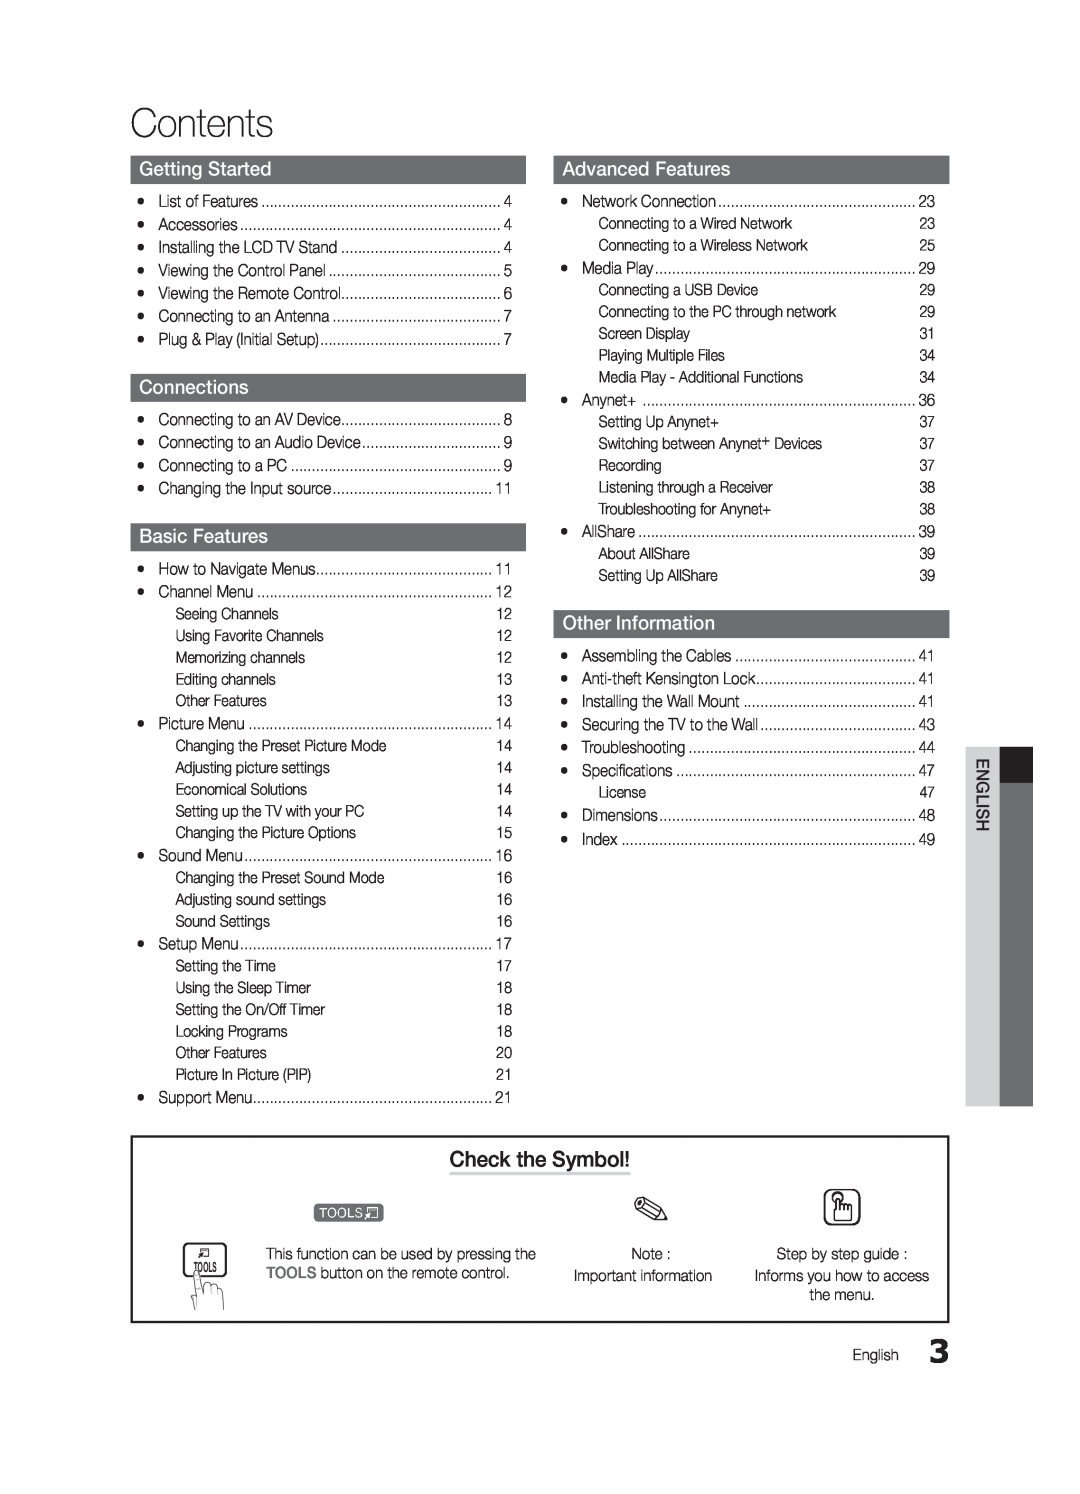 Samsung LN32C550 user manual Contents, Check the Symbol, Getting Started, Connections, Advanced Features, Basic Features 